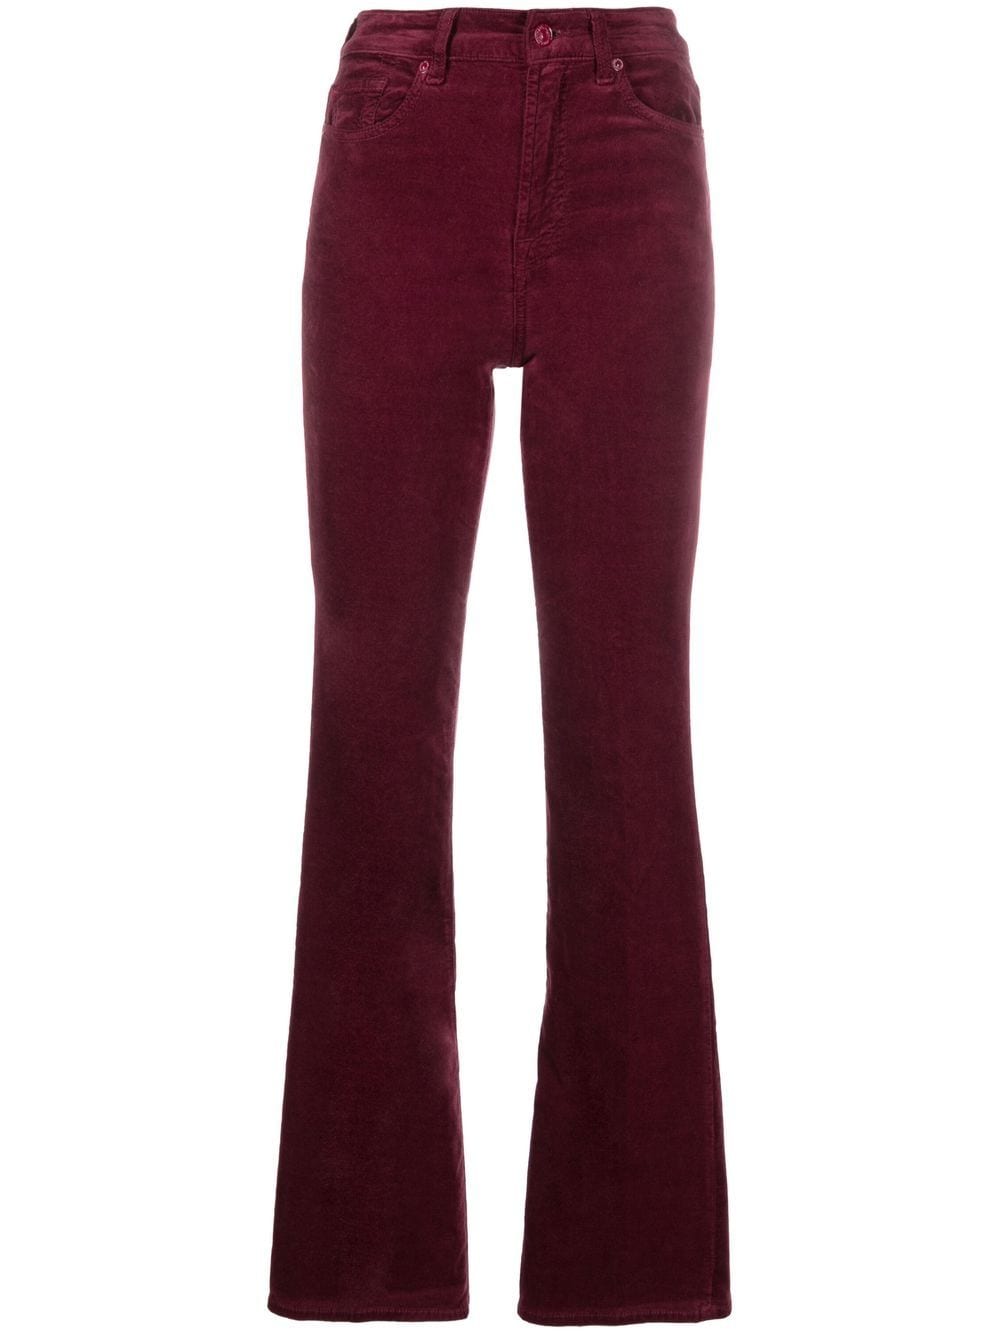 7 For All Mankind Lisha flared bootcut trousers